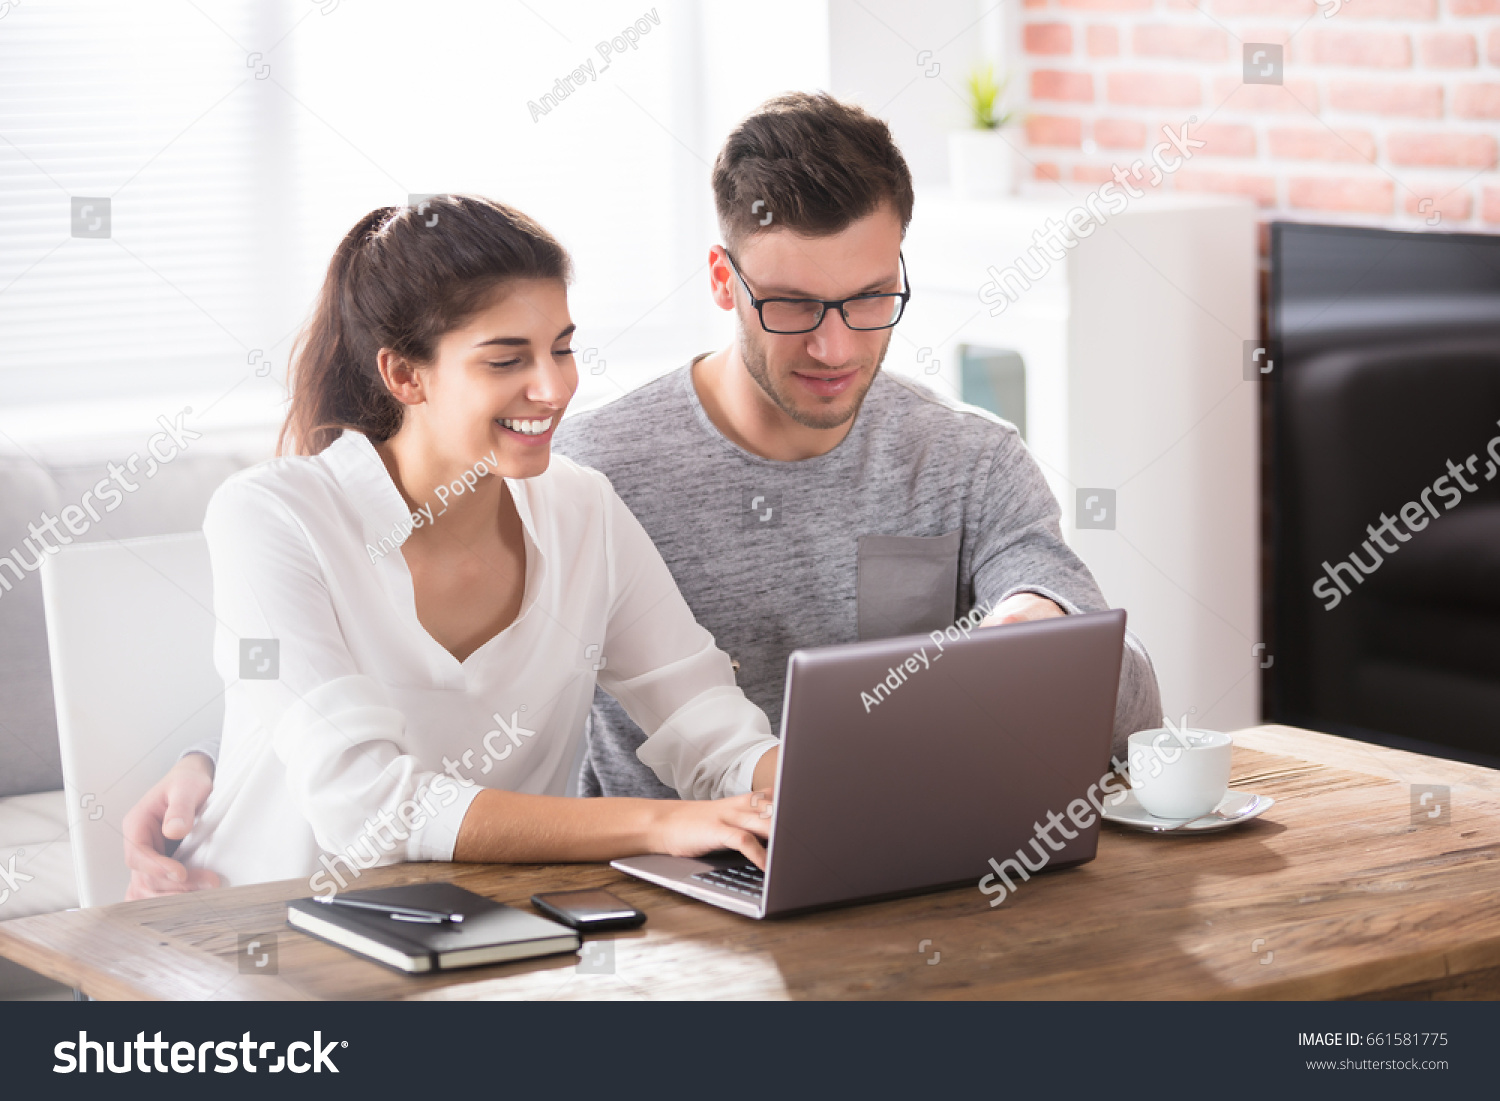 Smiling Young Couple Looking At Laptop On Table While Having Breakfast At Home #661581775